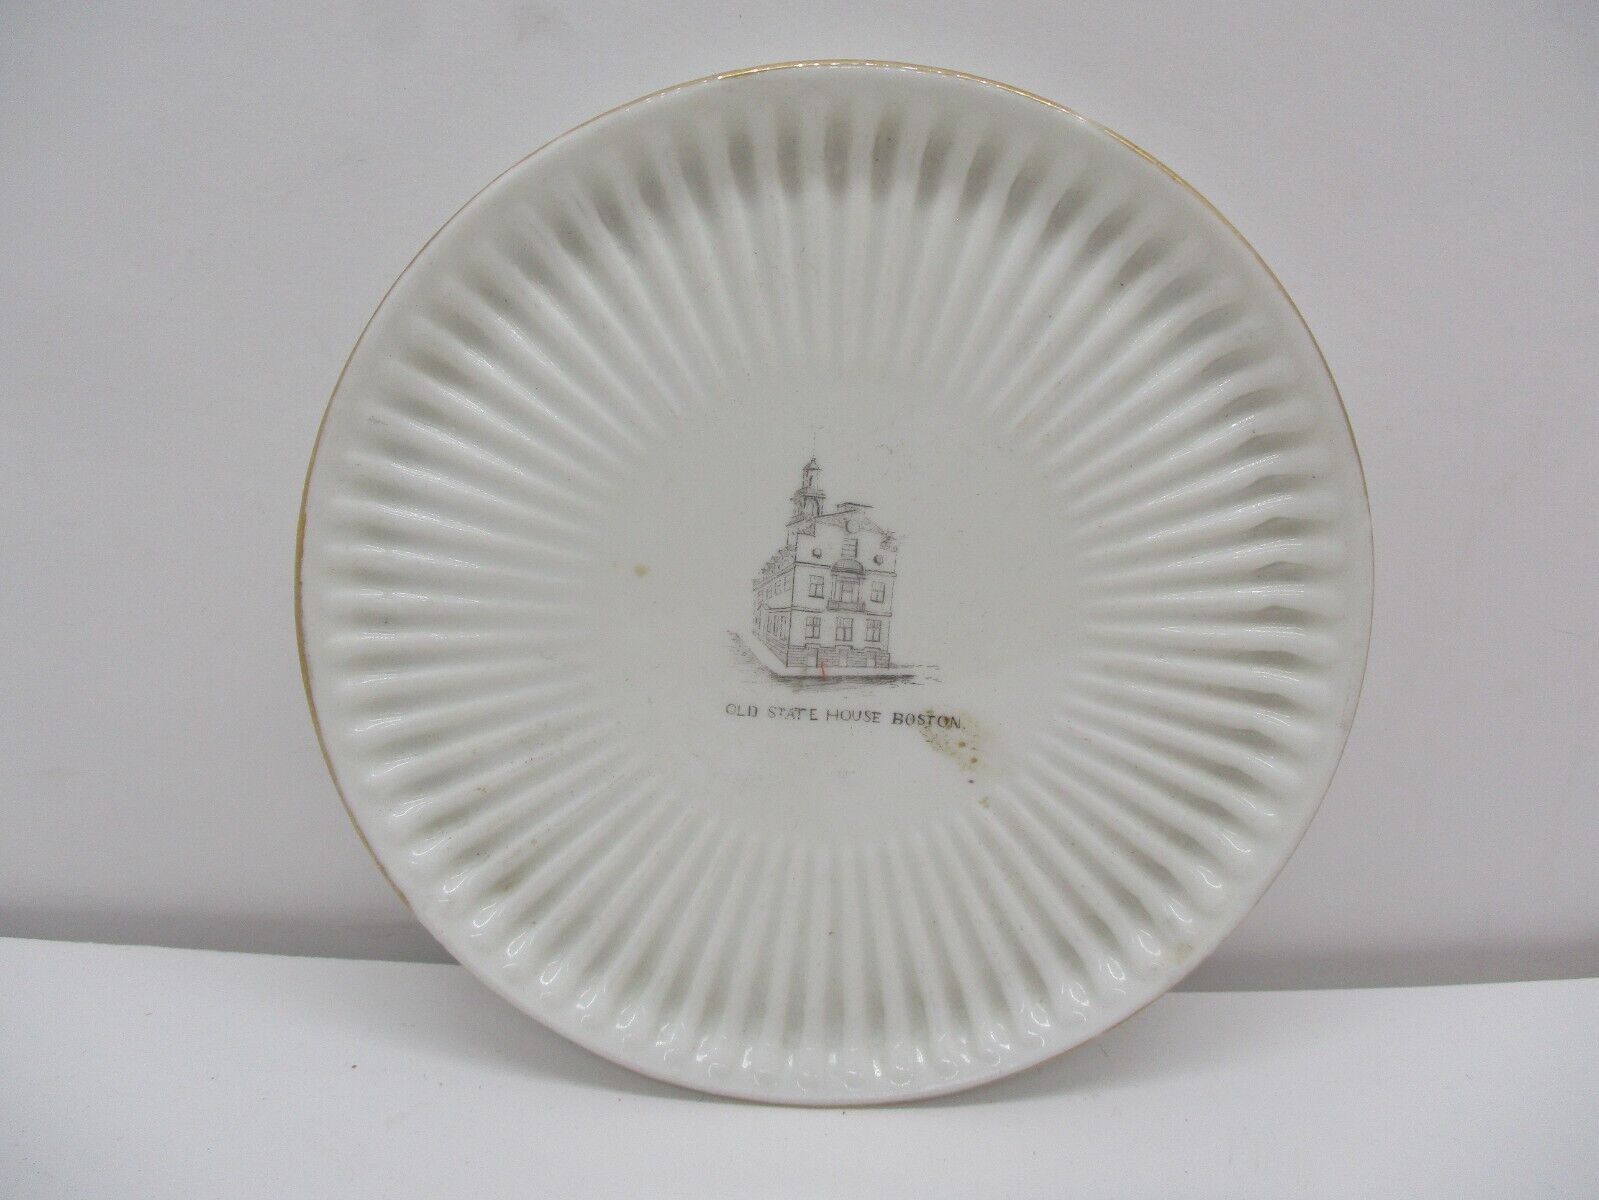 Vintage Old State House Boston Plate .. Unmarked